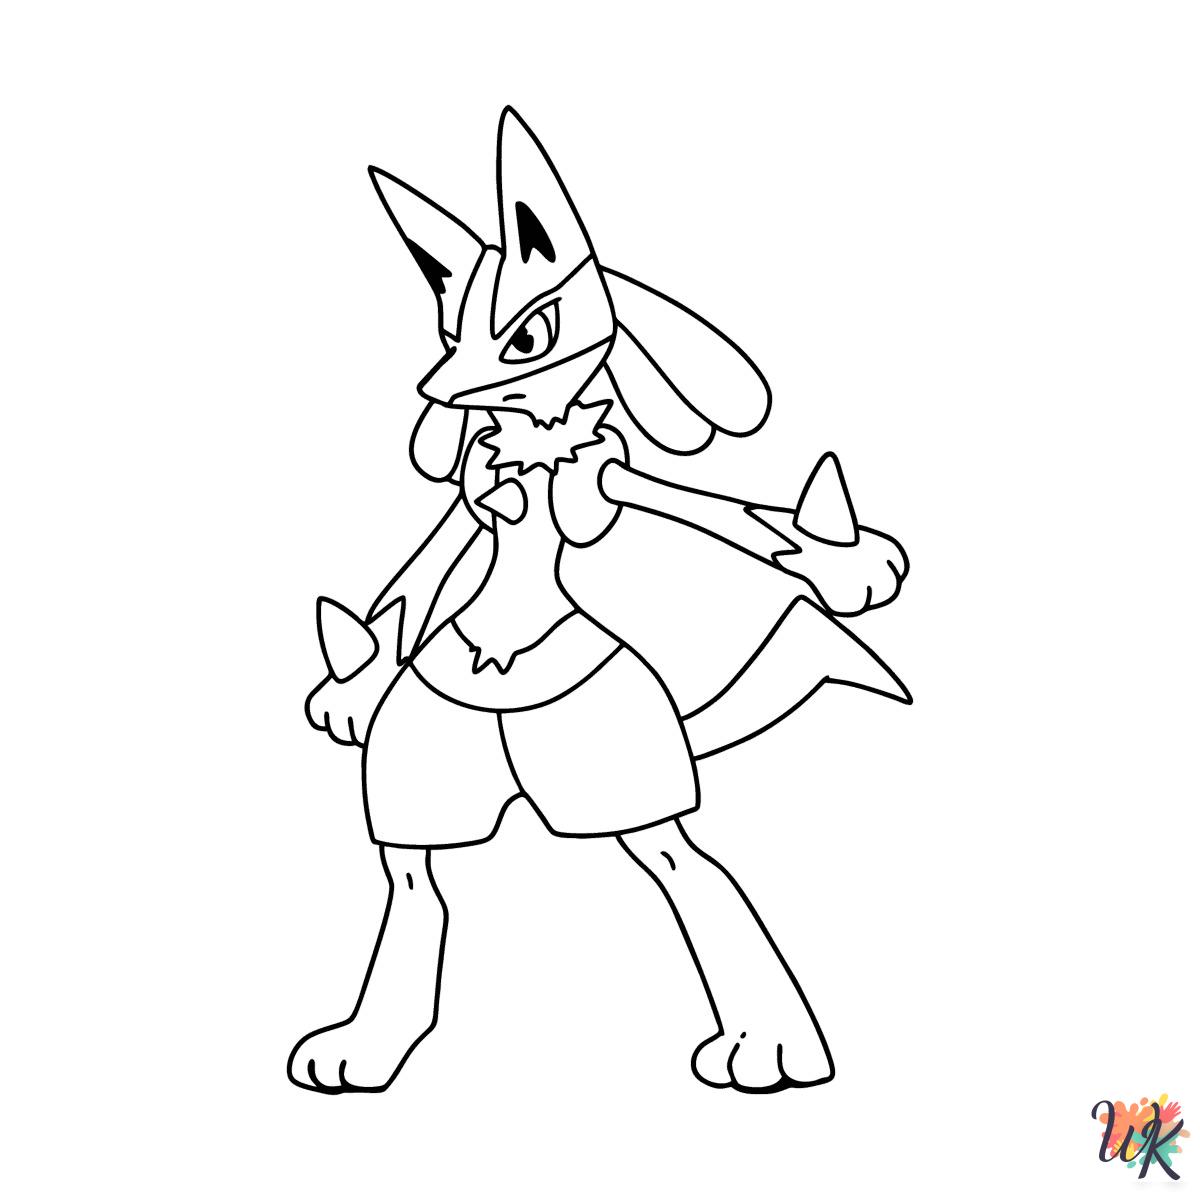 Lucario cards coloring pages